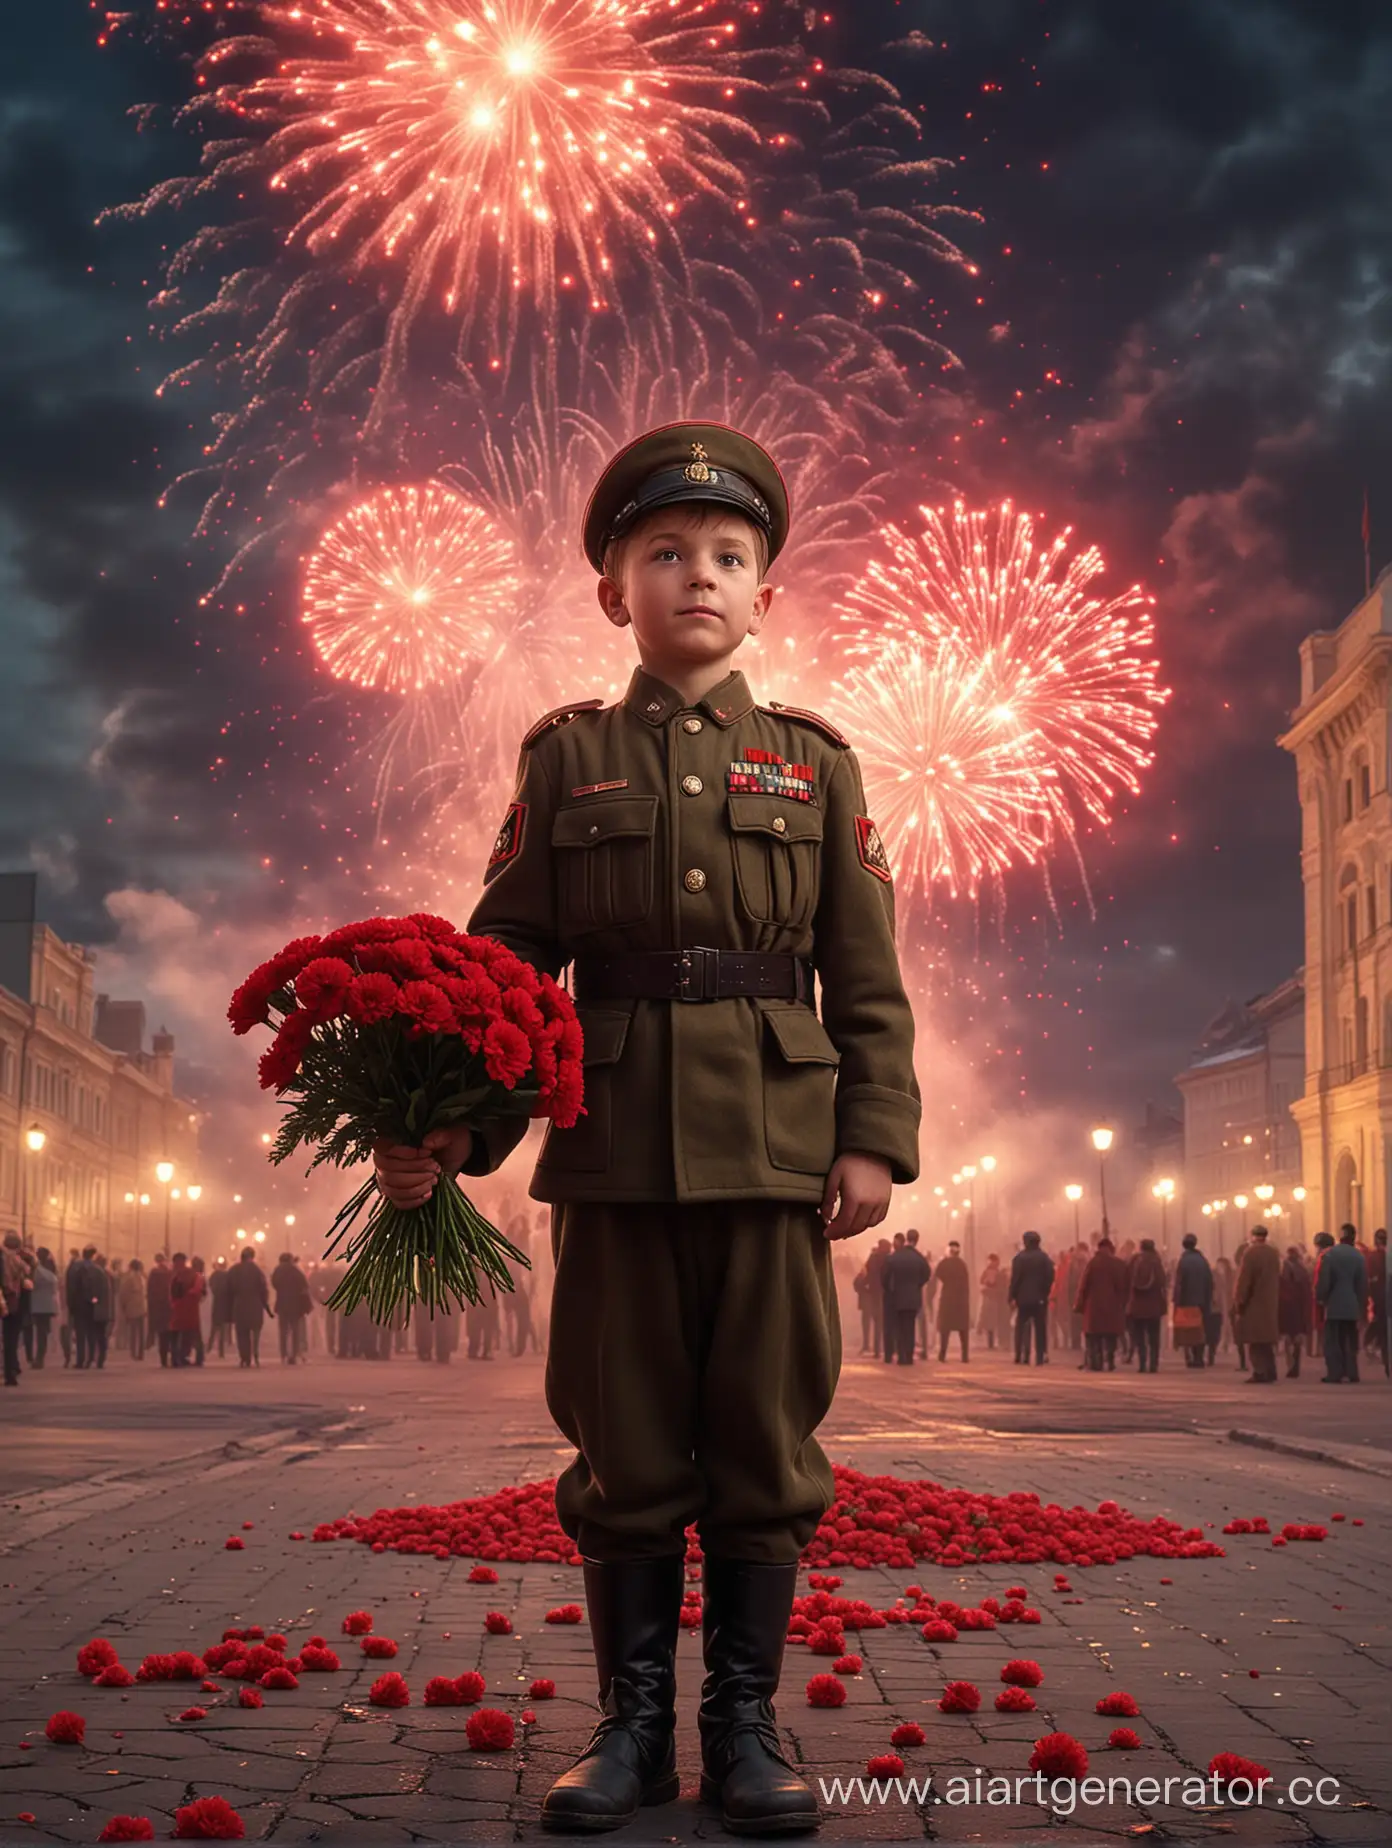 Soviet-Soldier-Uniform-Child-with-Red-Carnations-and-Vibrant-Fireworks